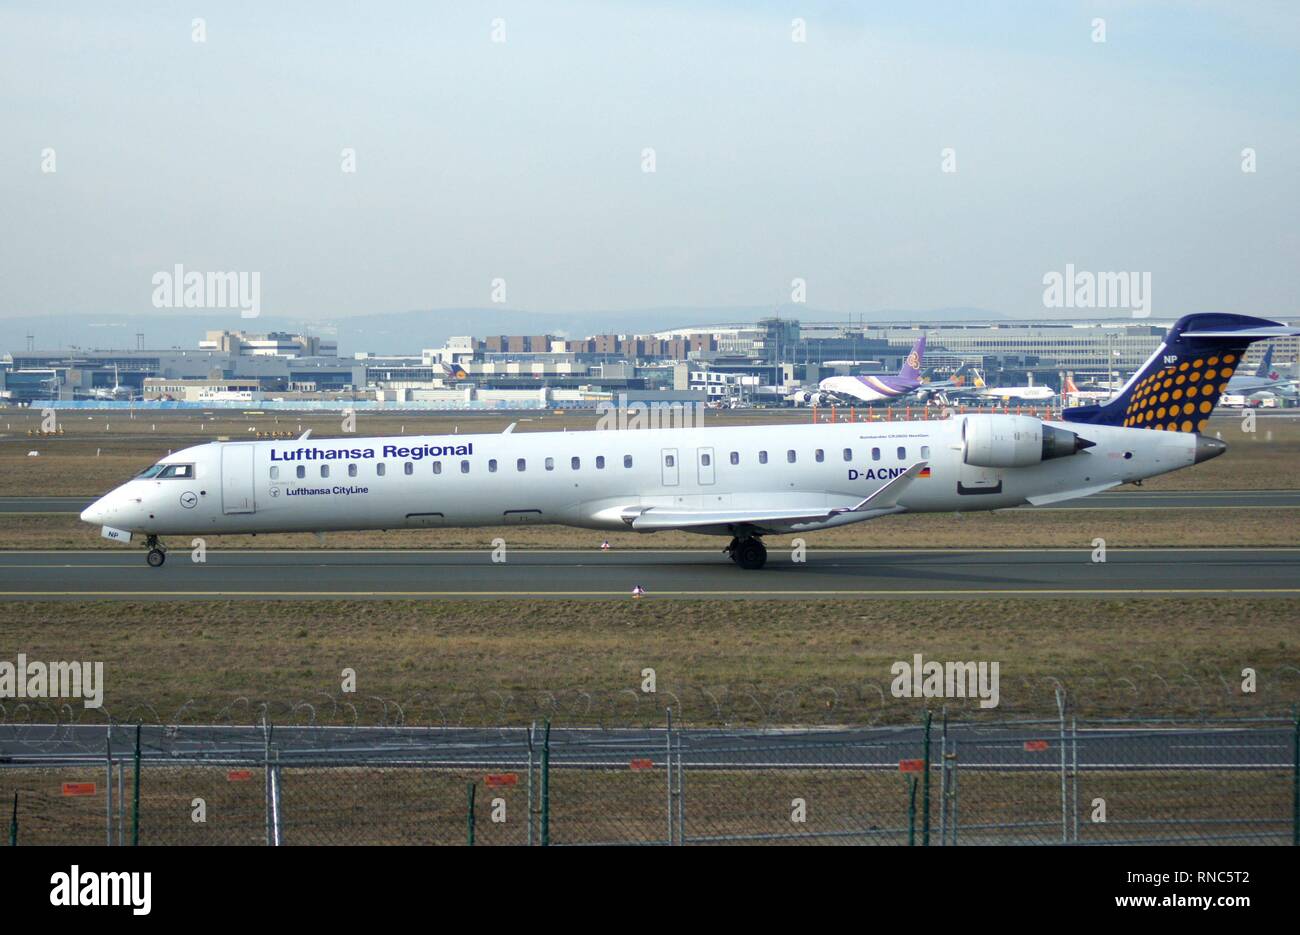 Frankfurt Airport. Frankfurt Rhine-Main Airport. A narrow-body aircraft Bombardier CRJ900 NextGen of the German airline Lufthansa Regional, rolls to a parking position on the south side of the airport. | usage worldwide Stock Photo